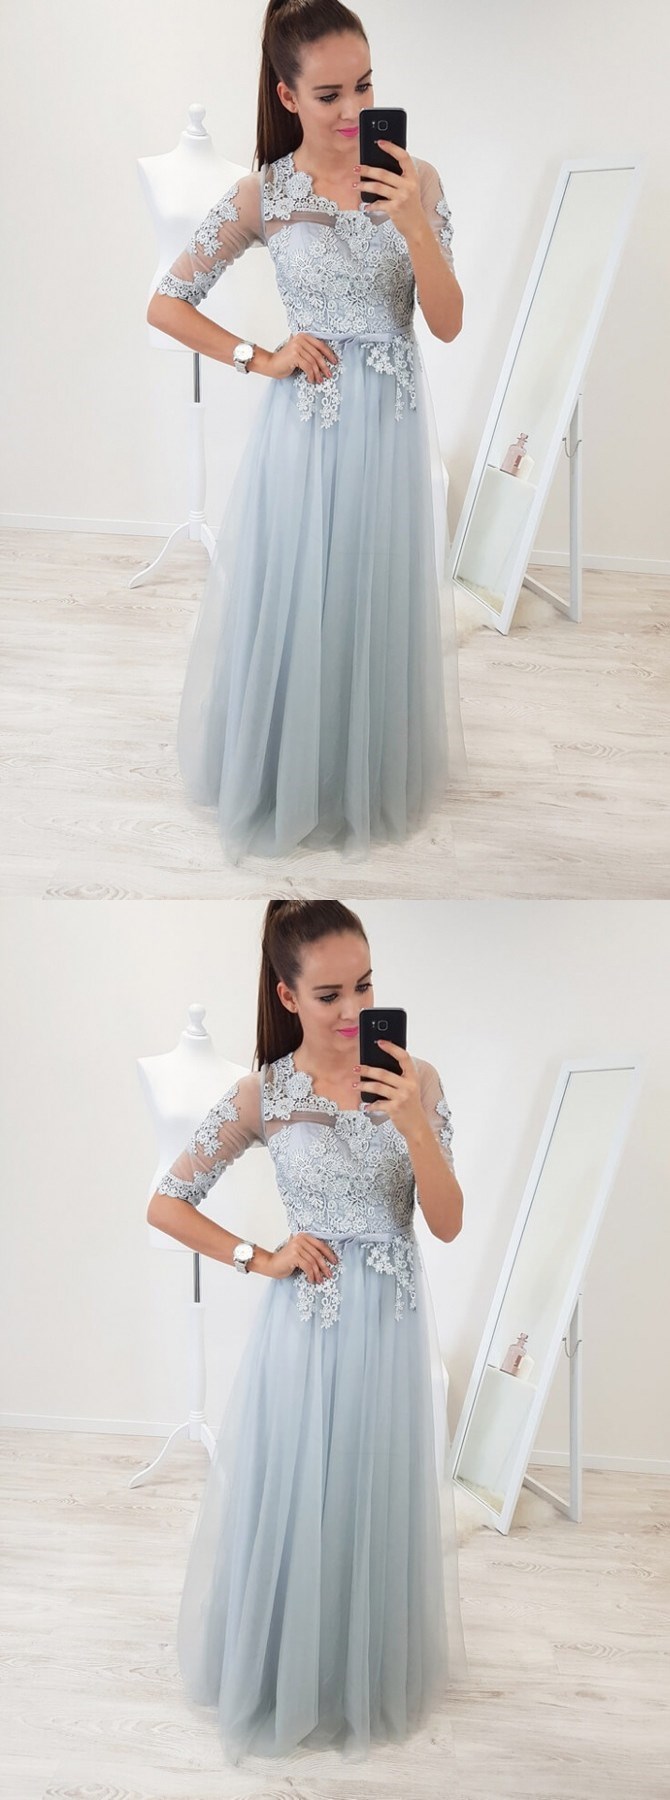 A-line Scoop Half Sleeves Floor-length Light Blue Prom Dress With Appliques,2018 Plus Size Half Sleeve Lace Evening Dresses, Women Guest Gowns ,